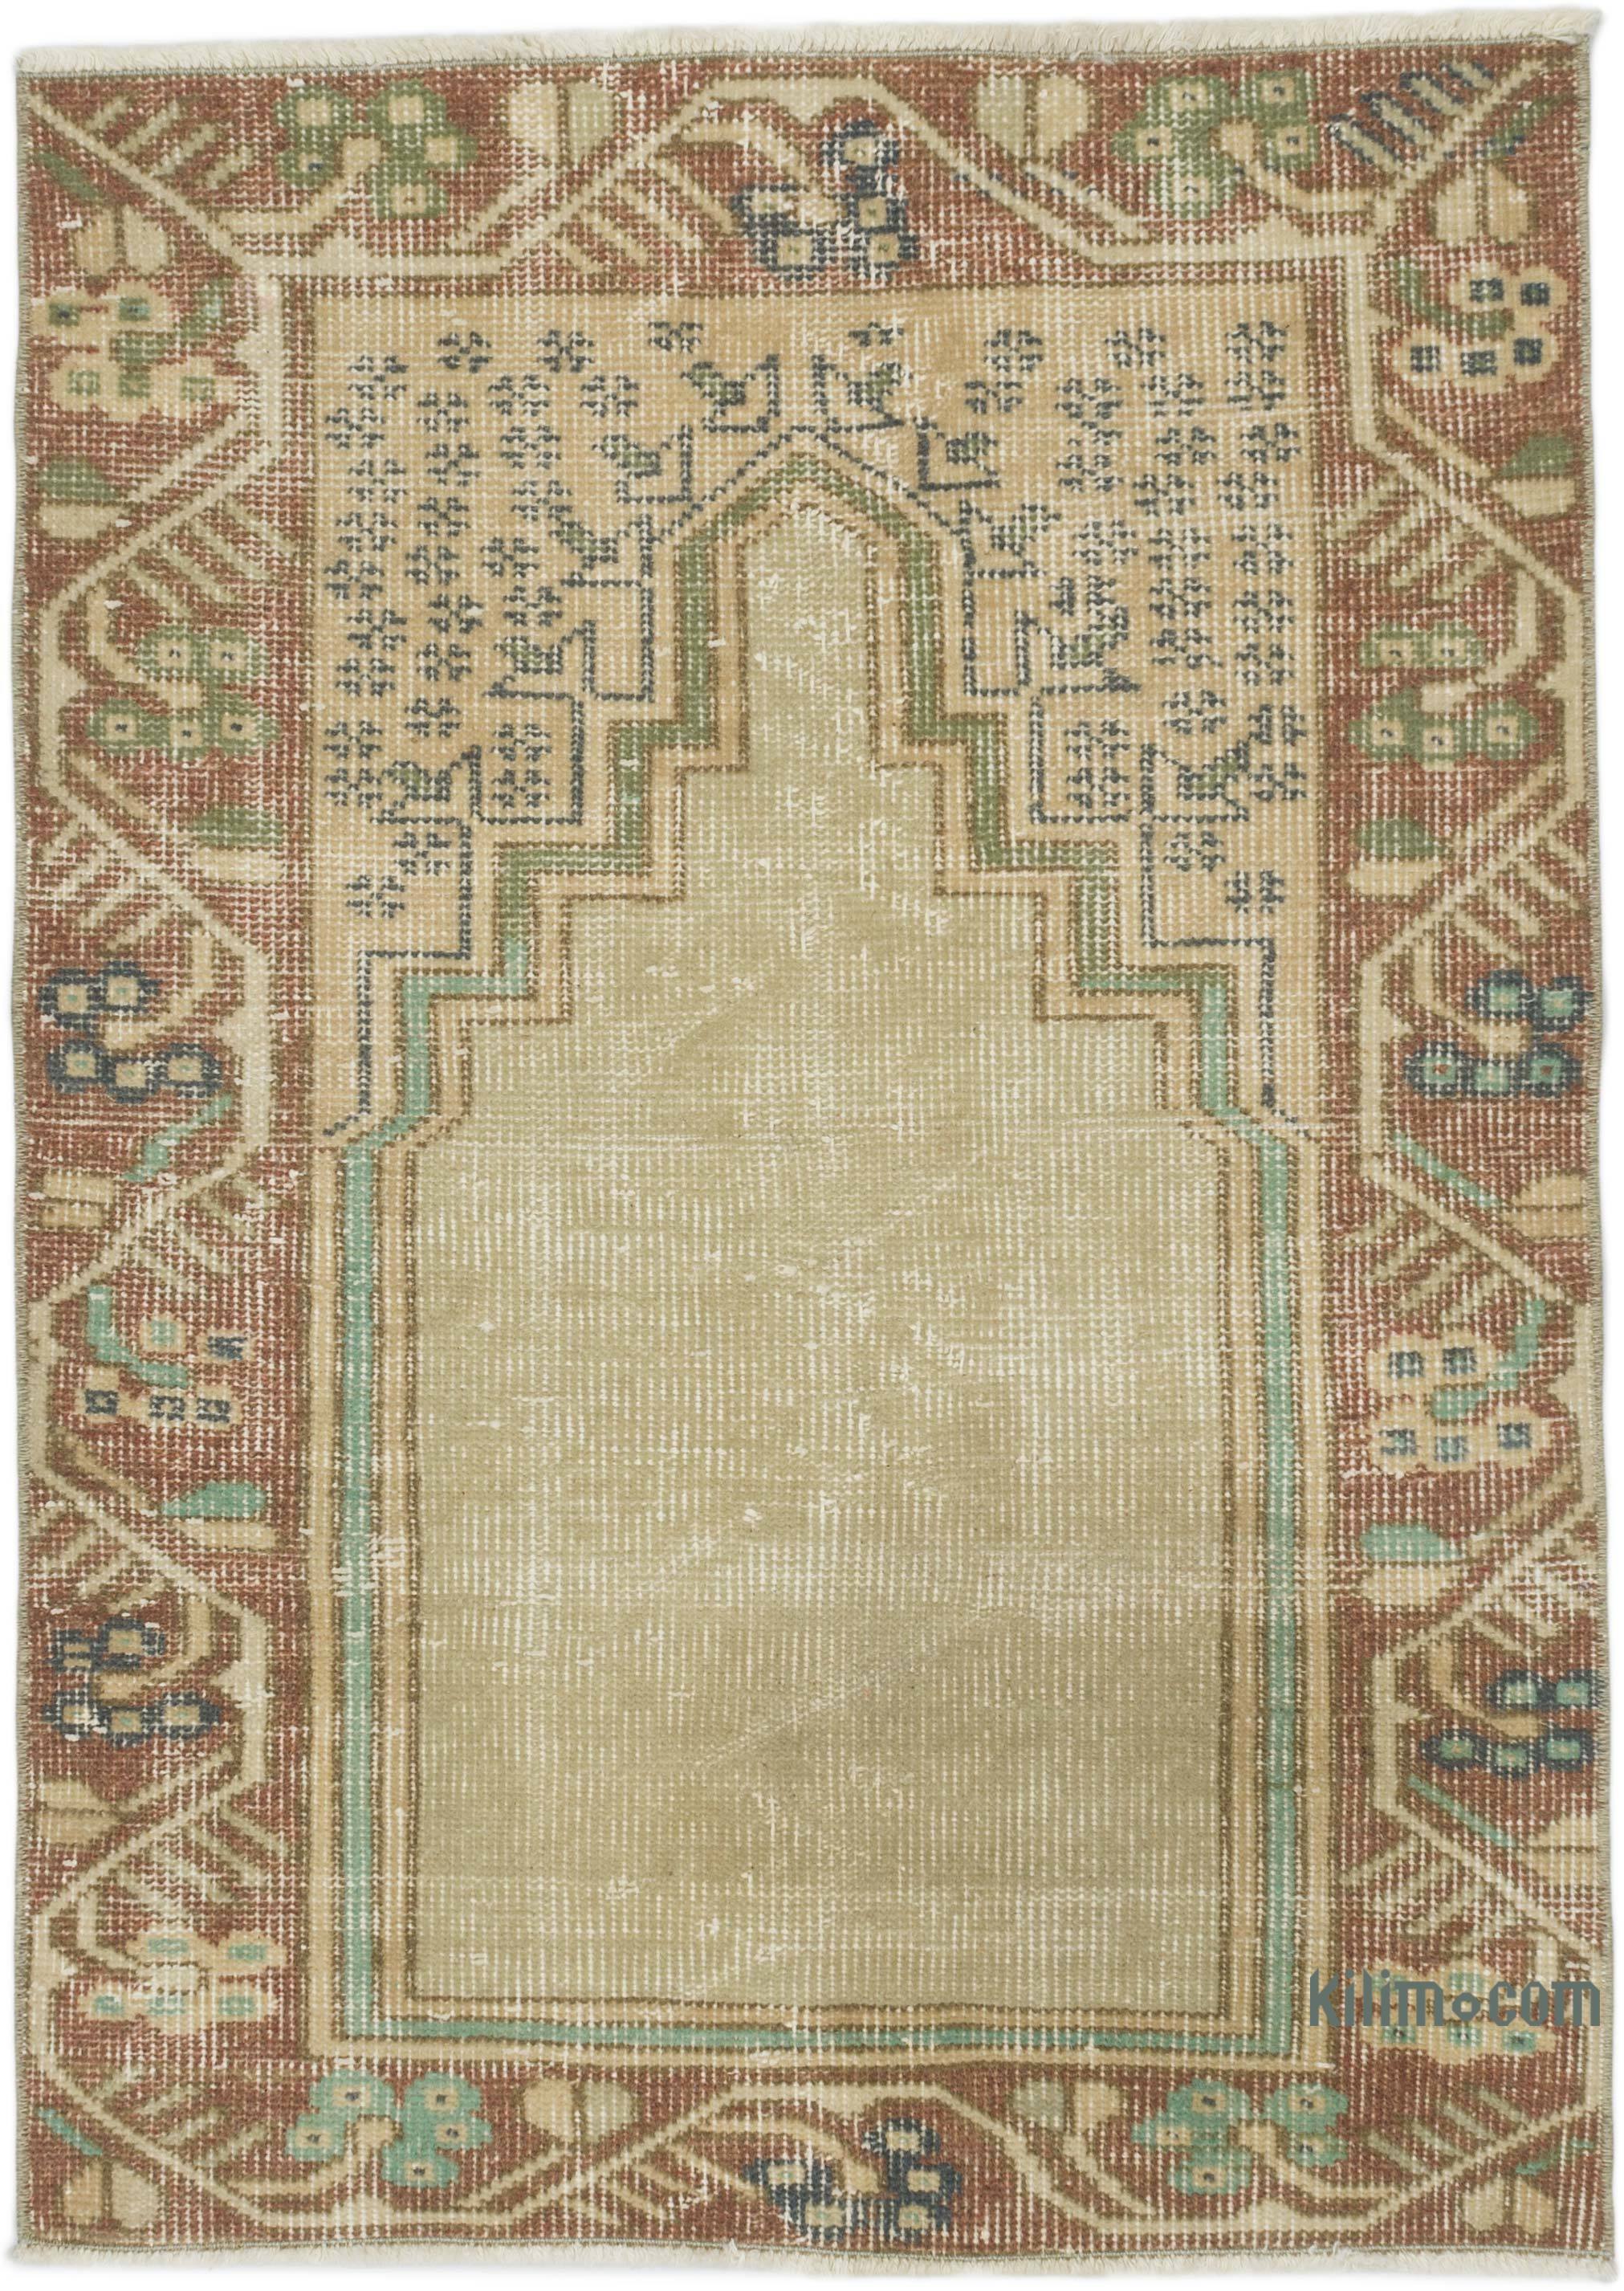 K0069879 Vintage Turkish Hand-Knotted Rug - 2' 4 x 3' 2 (28 x 38)  The  Source for Vintage Rugs, Tribal Kilim Rugs, Wool Turkish Rugs, Overdyed  Persian Rugs, Runner Rugs, Patchwork